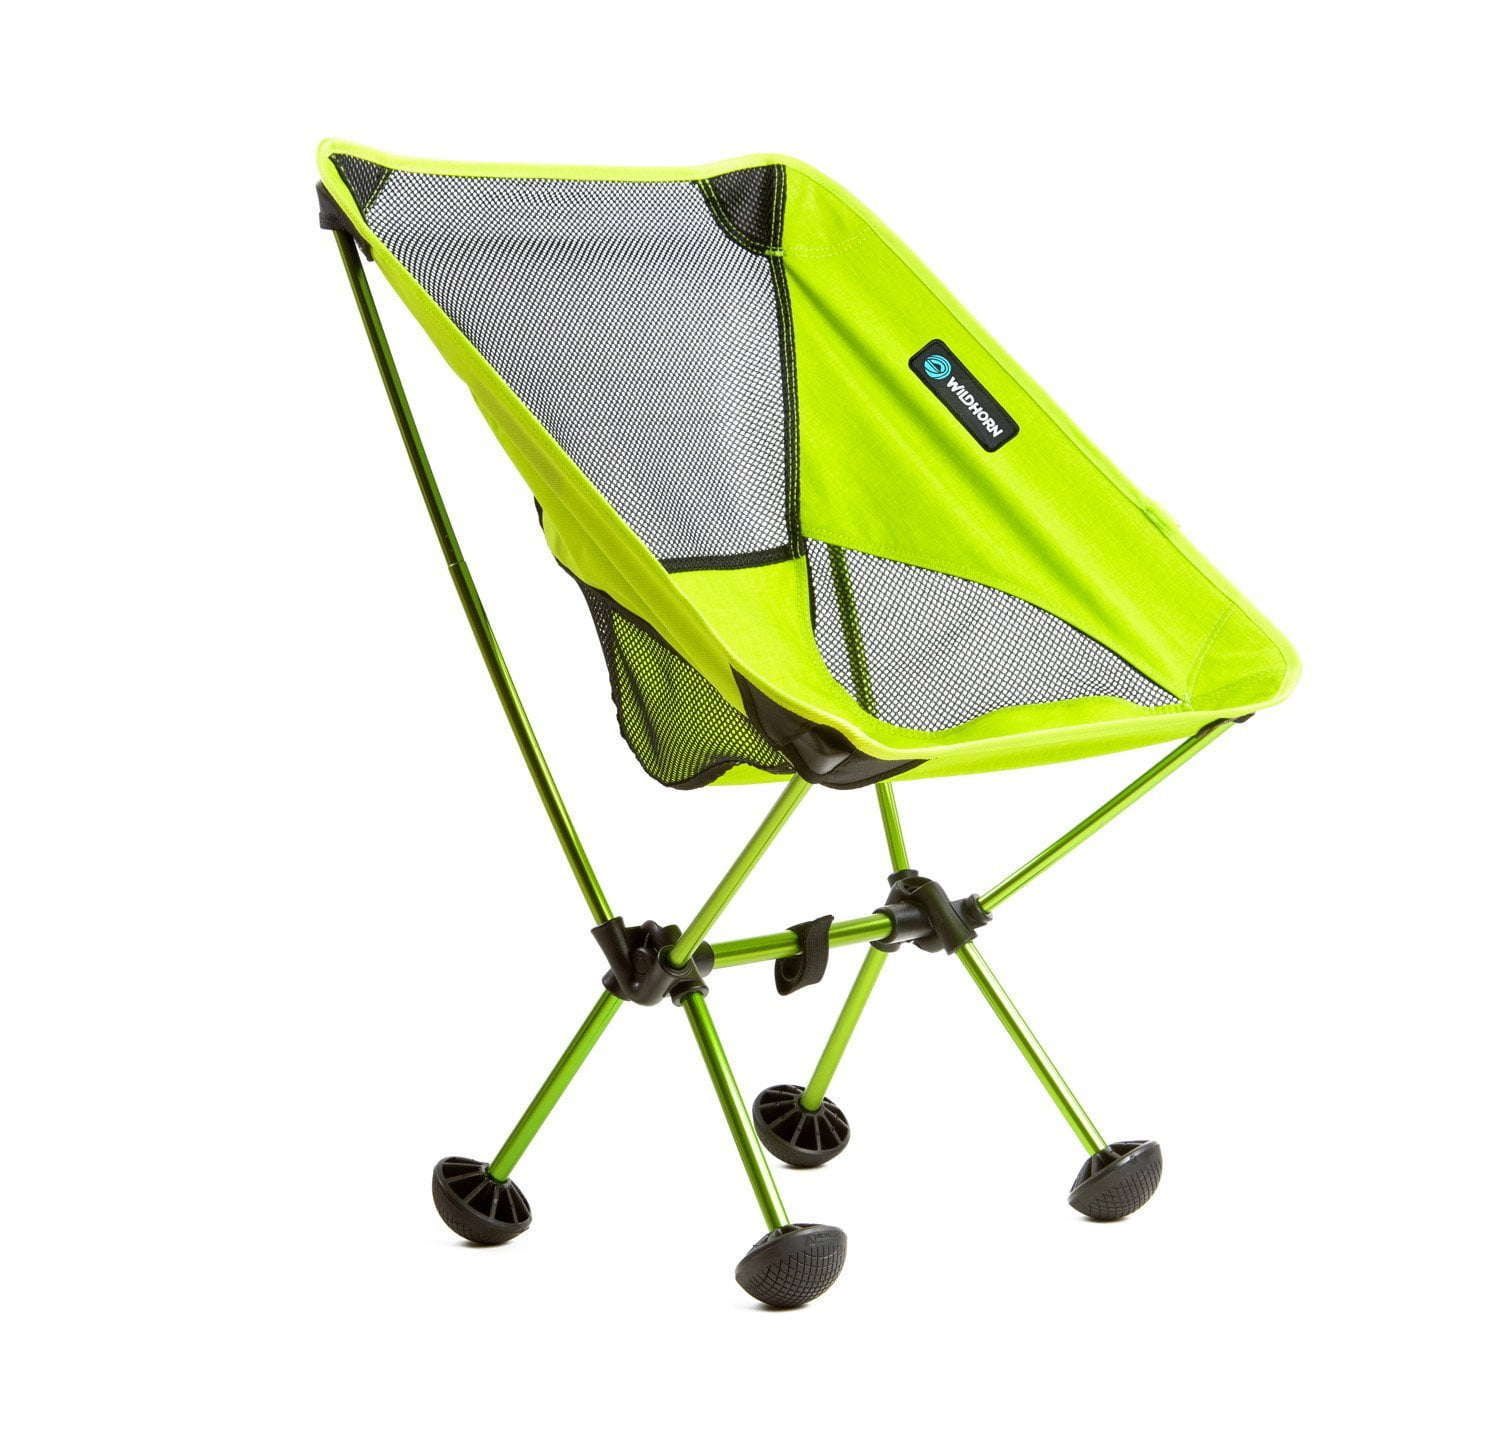 Wildhorn Outfitters Terralite Portable Folding Camping Beach